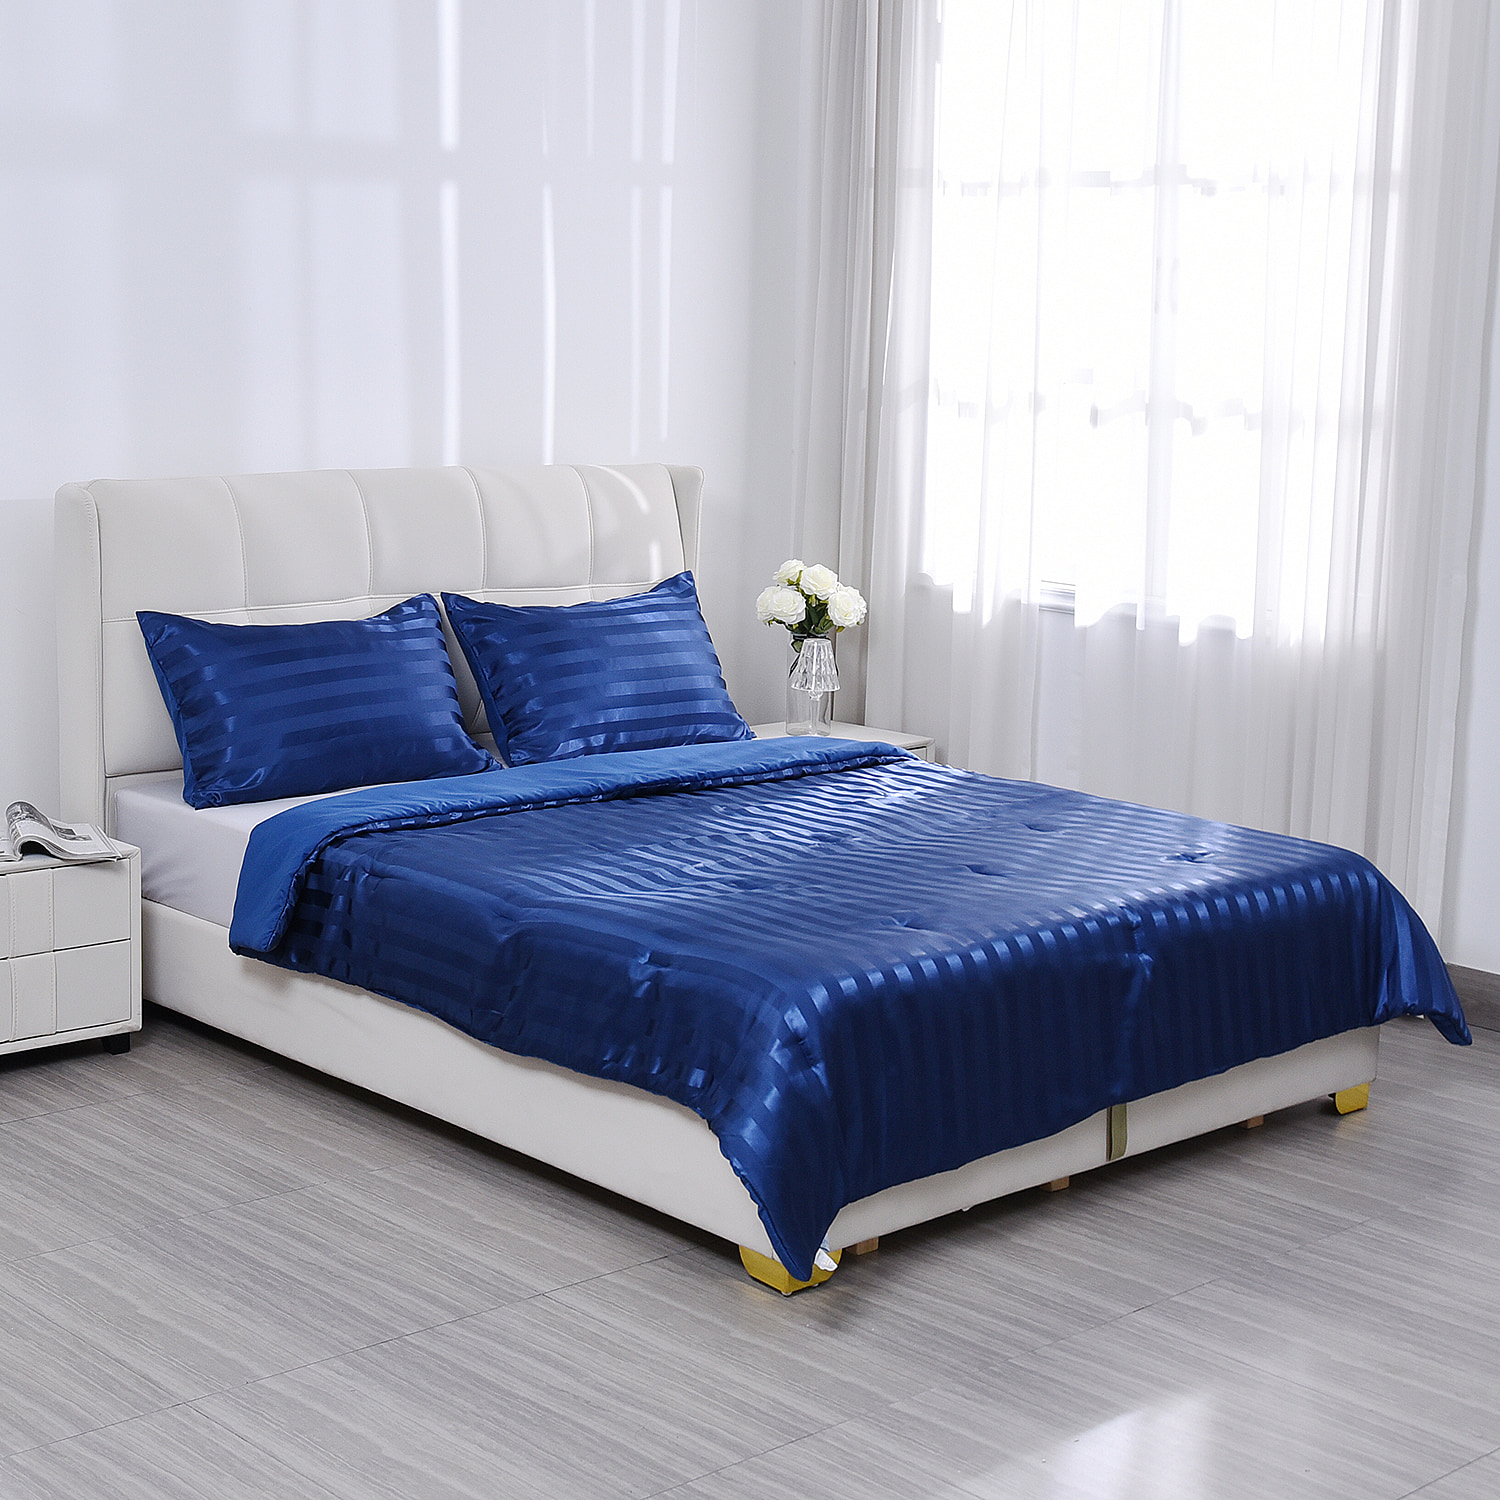 Polyester-Patterned-Comforter-and-Duvet-Size-200x1-cm-Blue-White